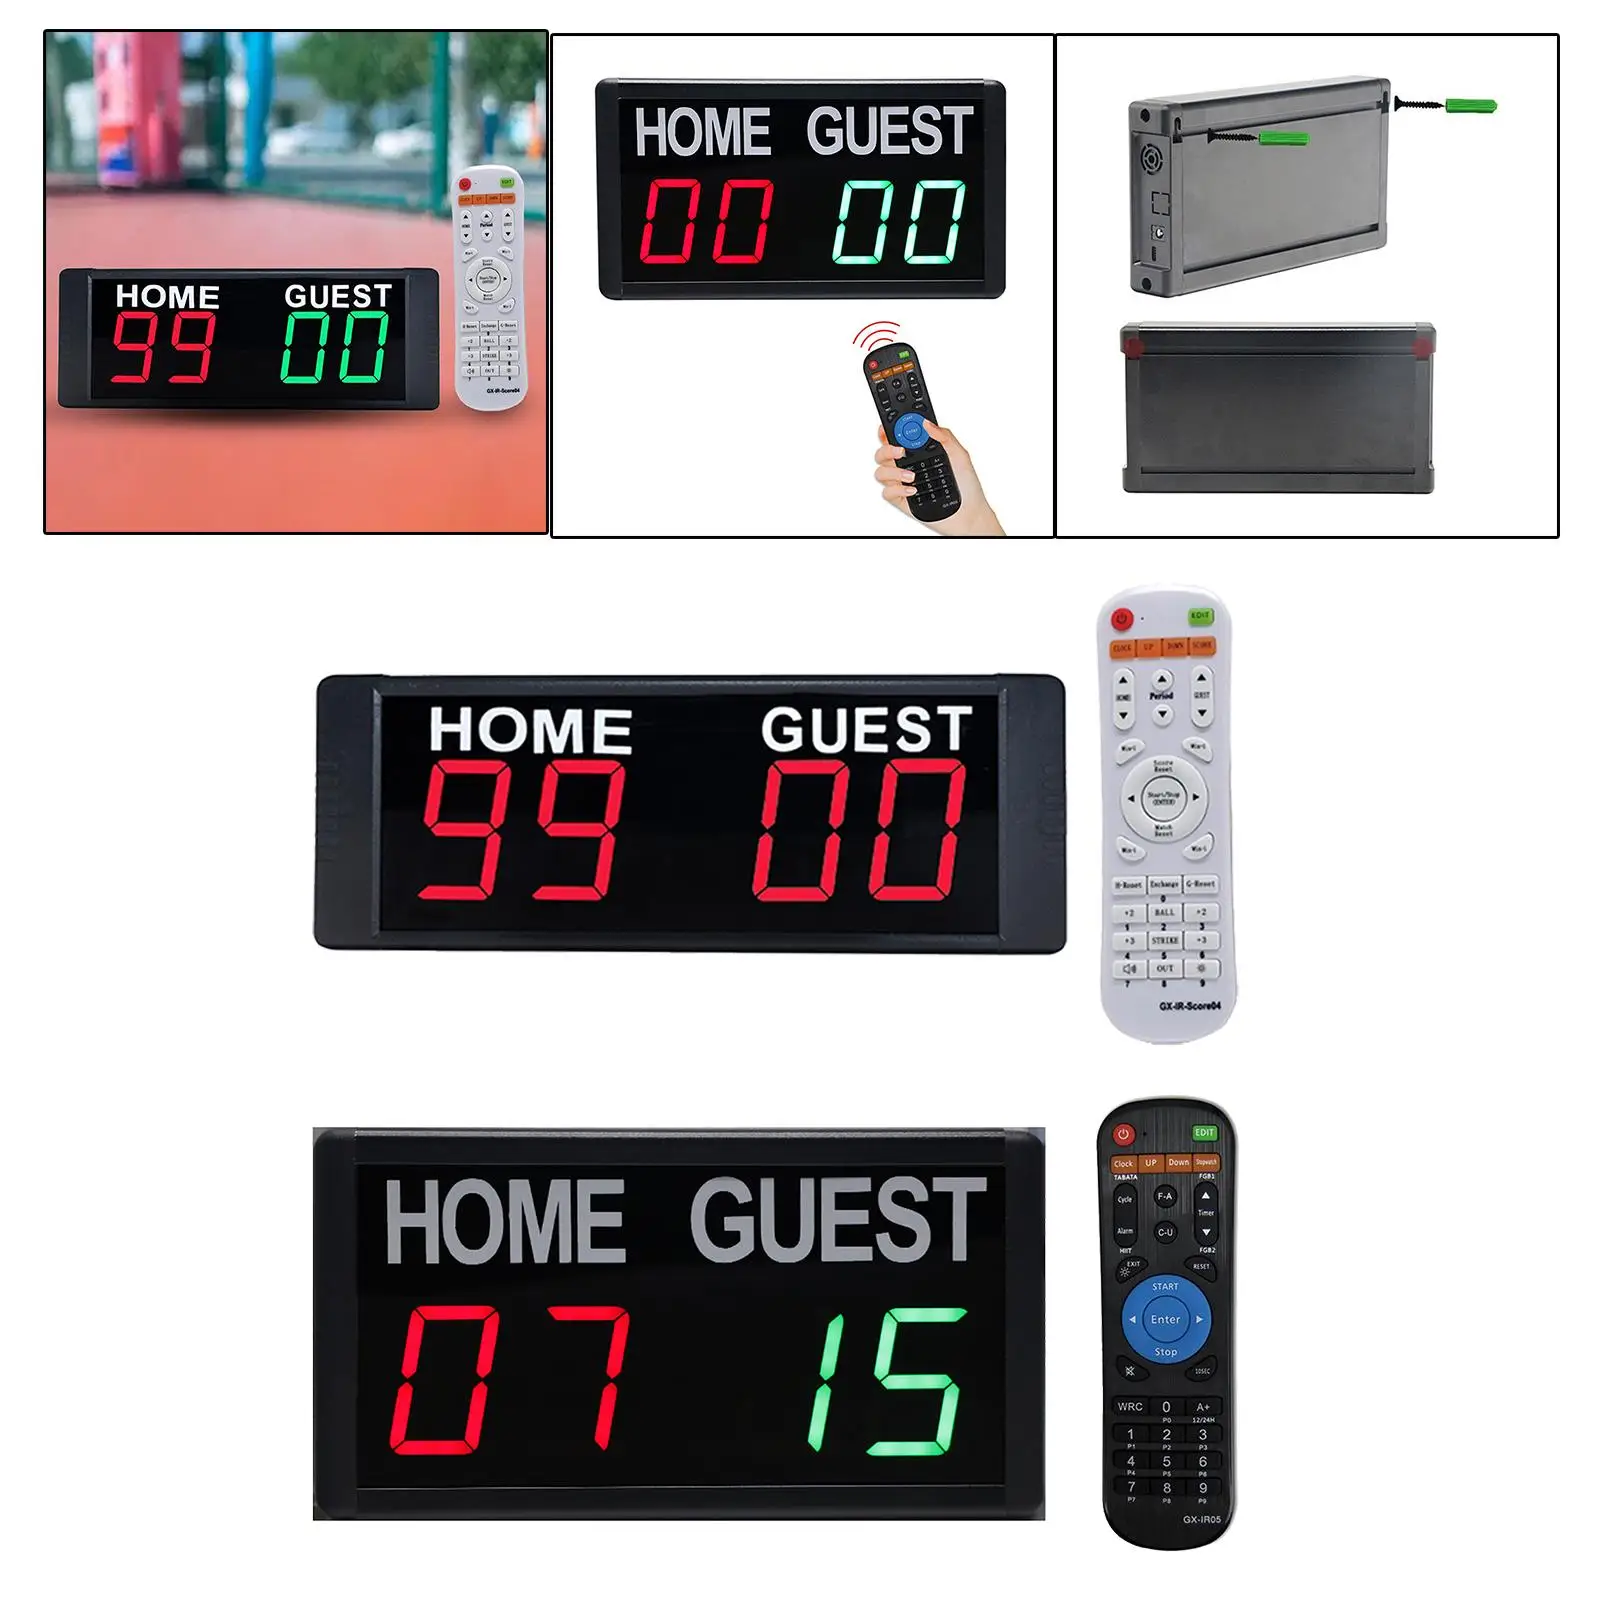 Wall Mounted Electronic Digital Scoreboard Remote Control Score Keeper Counter for Basketball Soccer Badminton Sports Wrestling